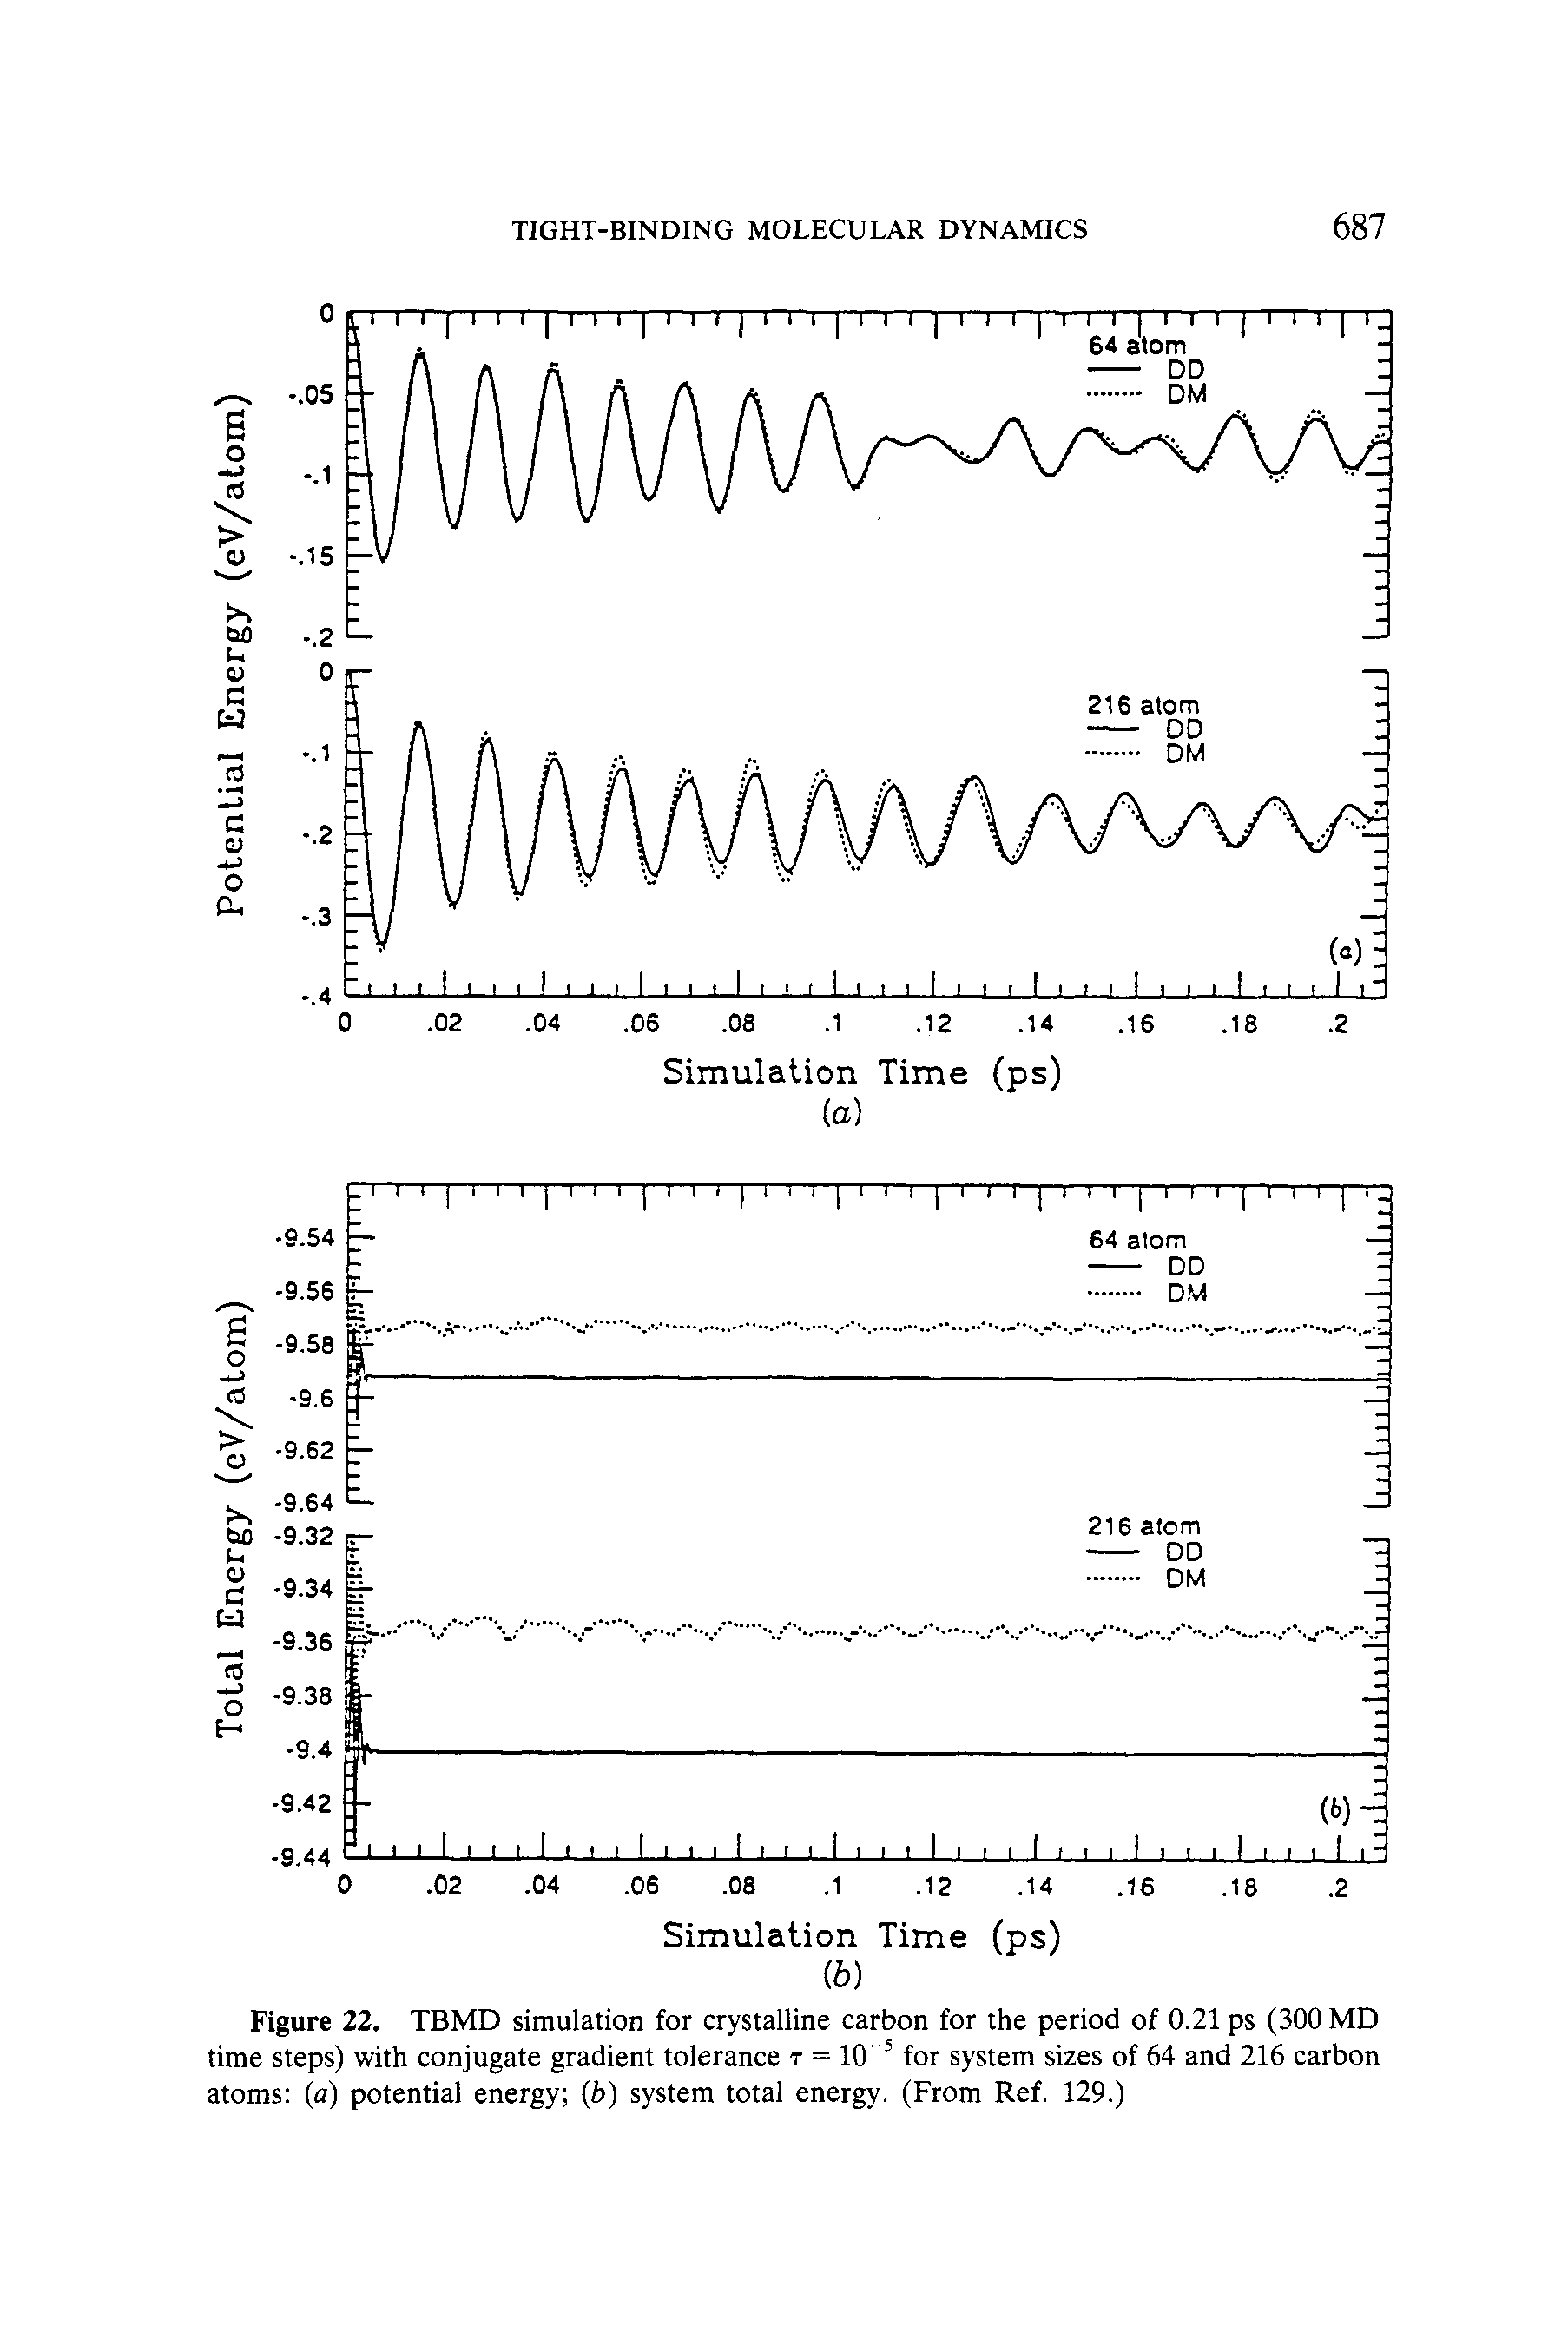 Figure 22. TBMD simulation for crystalline carbon for the period of 0.21 ps (300 MD time steps) with conjugate gradient tolerance t = 10 for system sizes of 64 and 216 carbon atoms (a) potential energy (i>) system total energy. (From Ref. 129.)...